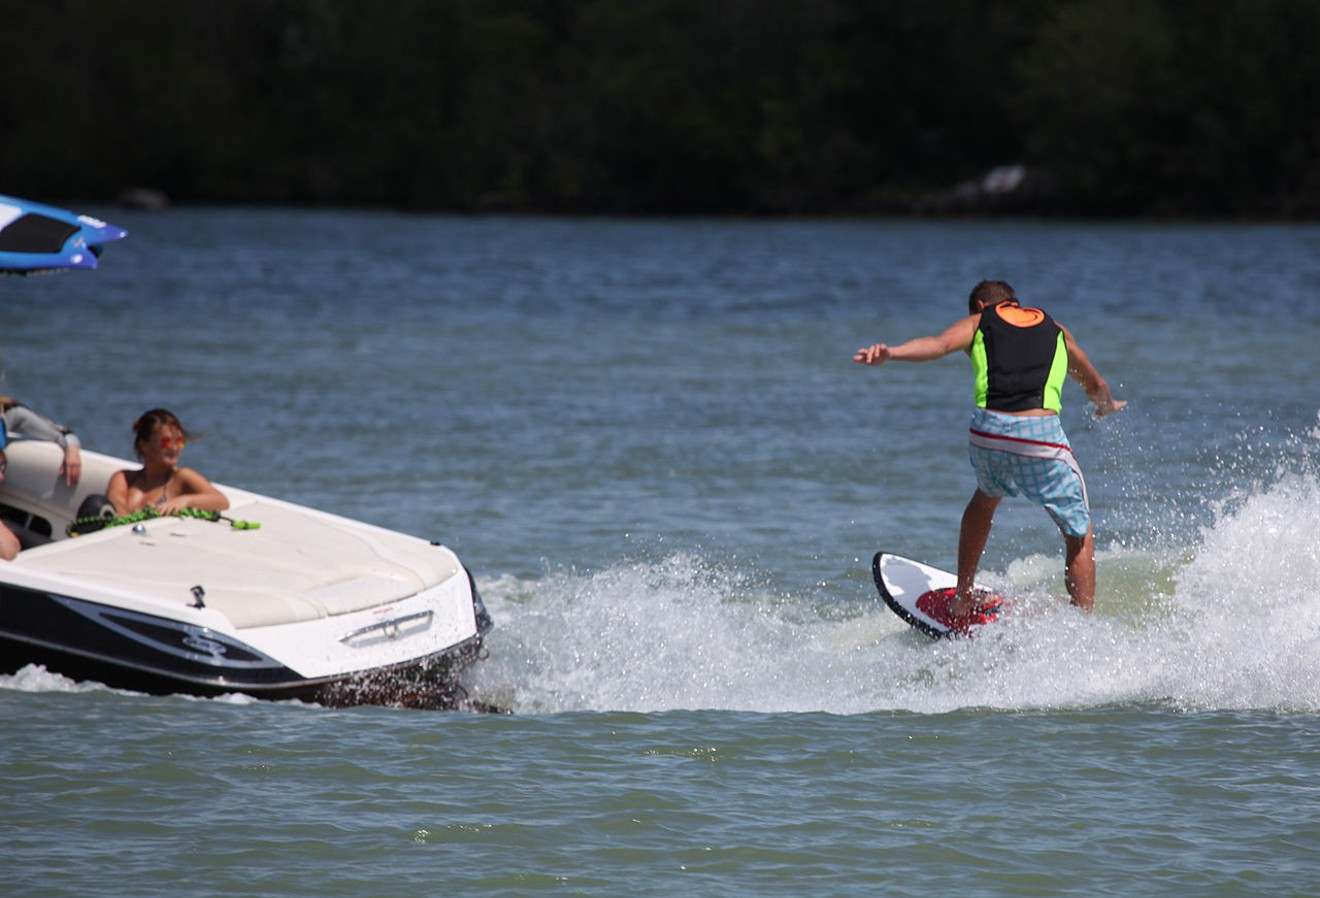 Newly proposed Arizona Game and Fish Department boating rules would require wake surfers to wear life vests.